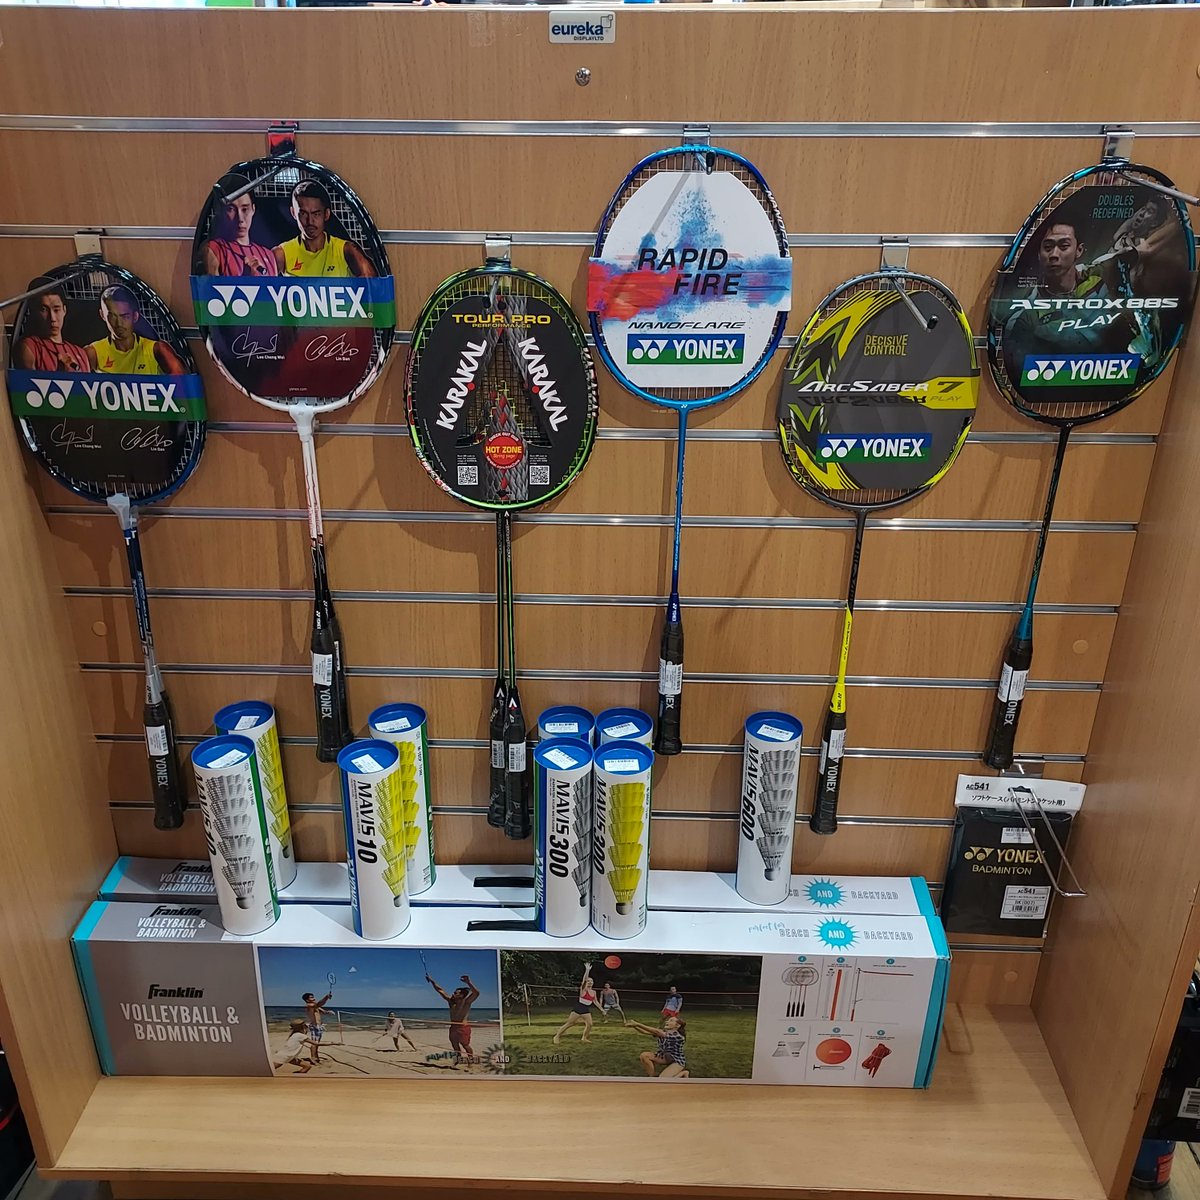 Our range of badminton rackets and accessories is now topped up and ready for the weekend!#herbertsport #eastgrinstead #badminton #gardengames #weekend #egindependentshops